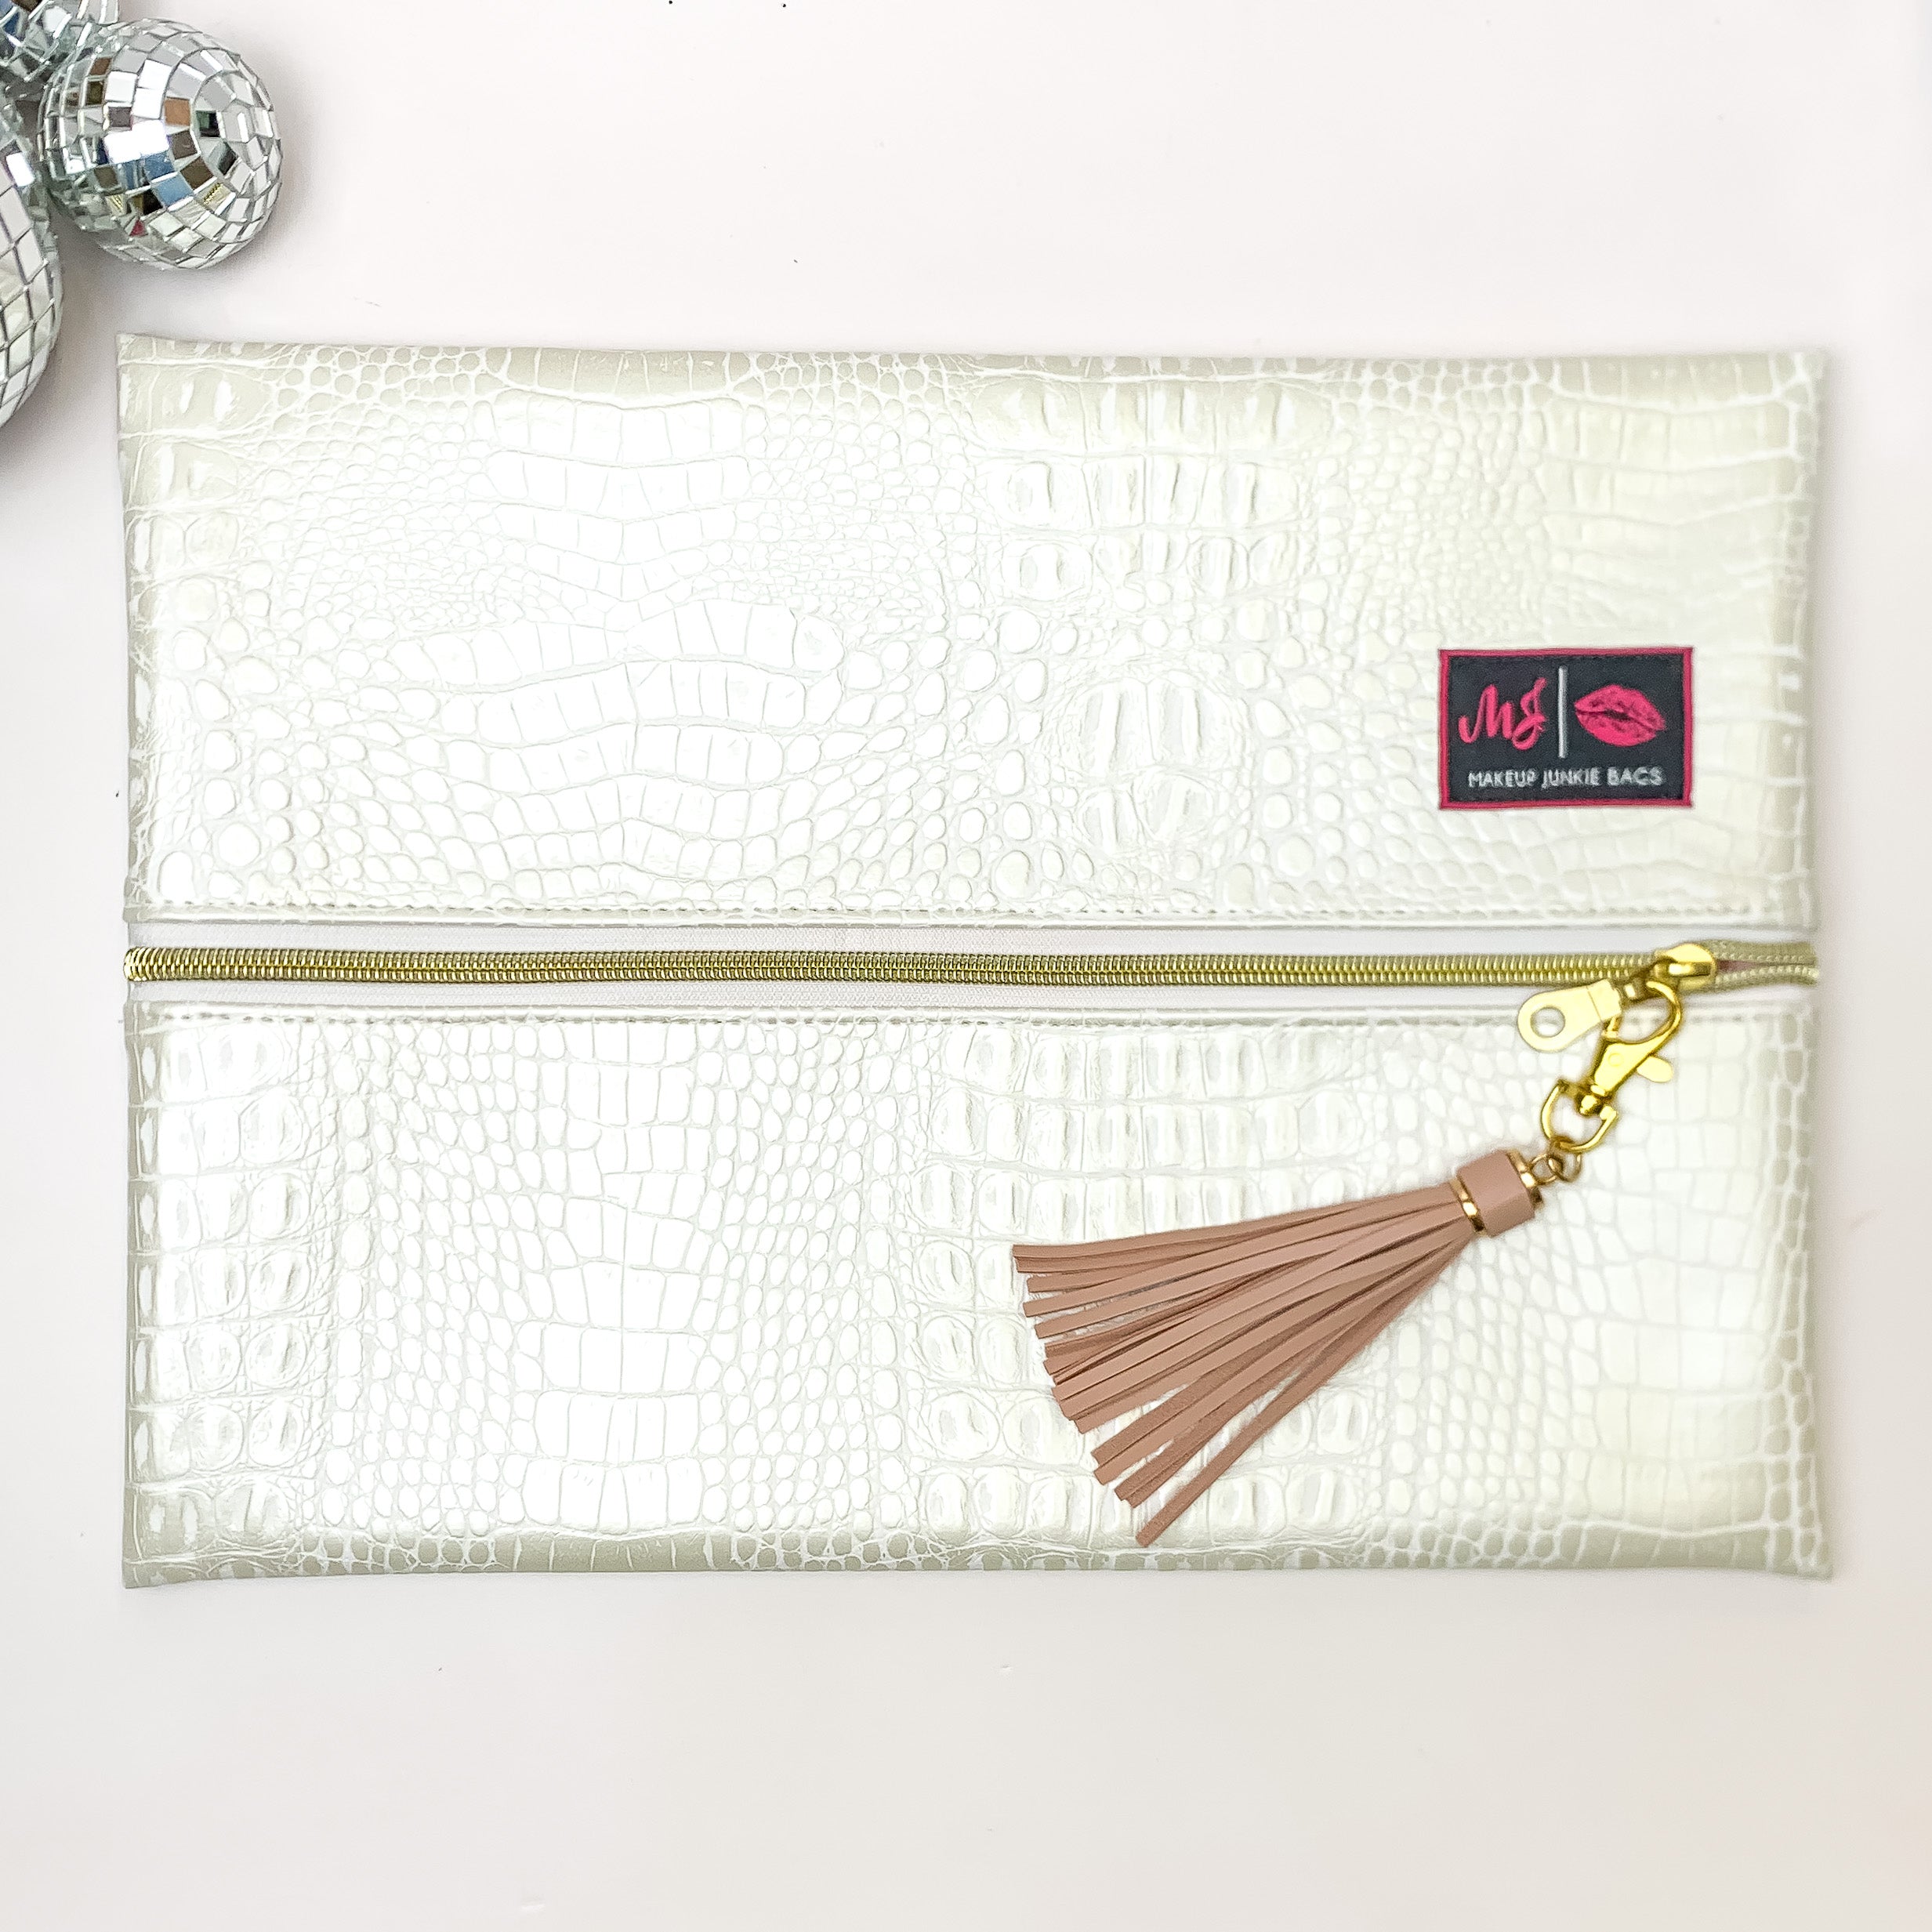 Makeup Junkie | Large Shade of Pearl Lay Flat Bag in Pearl White Croc Print